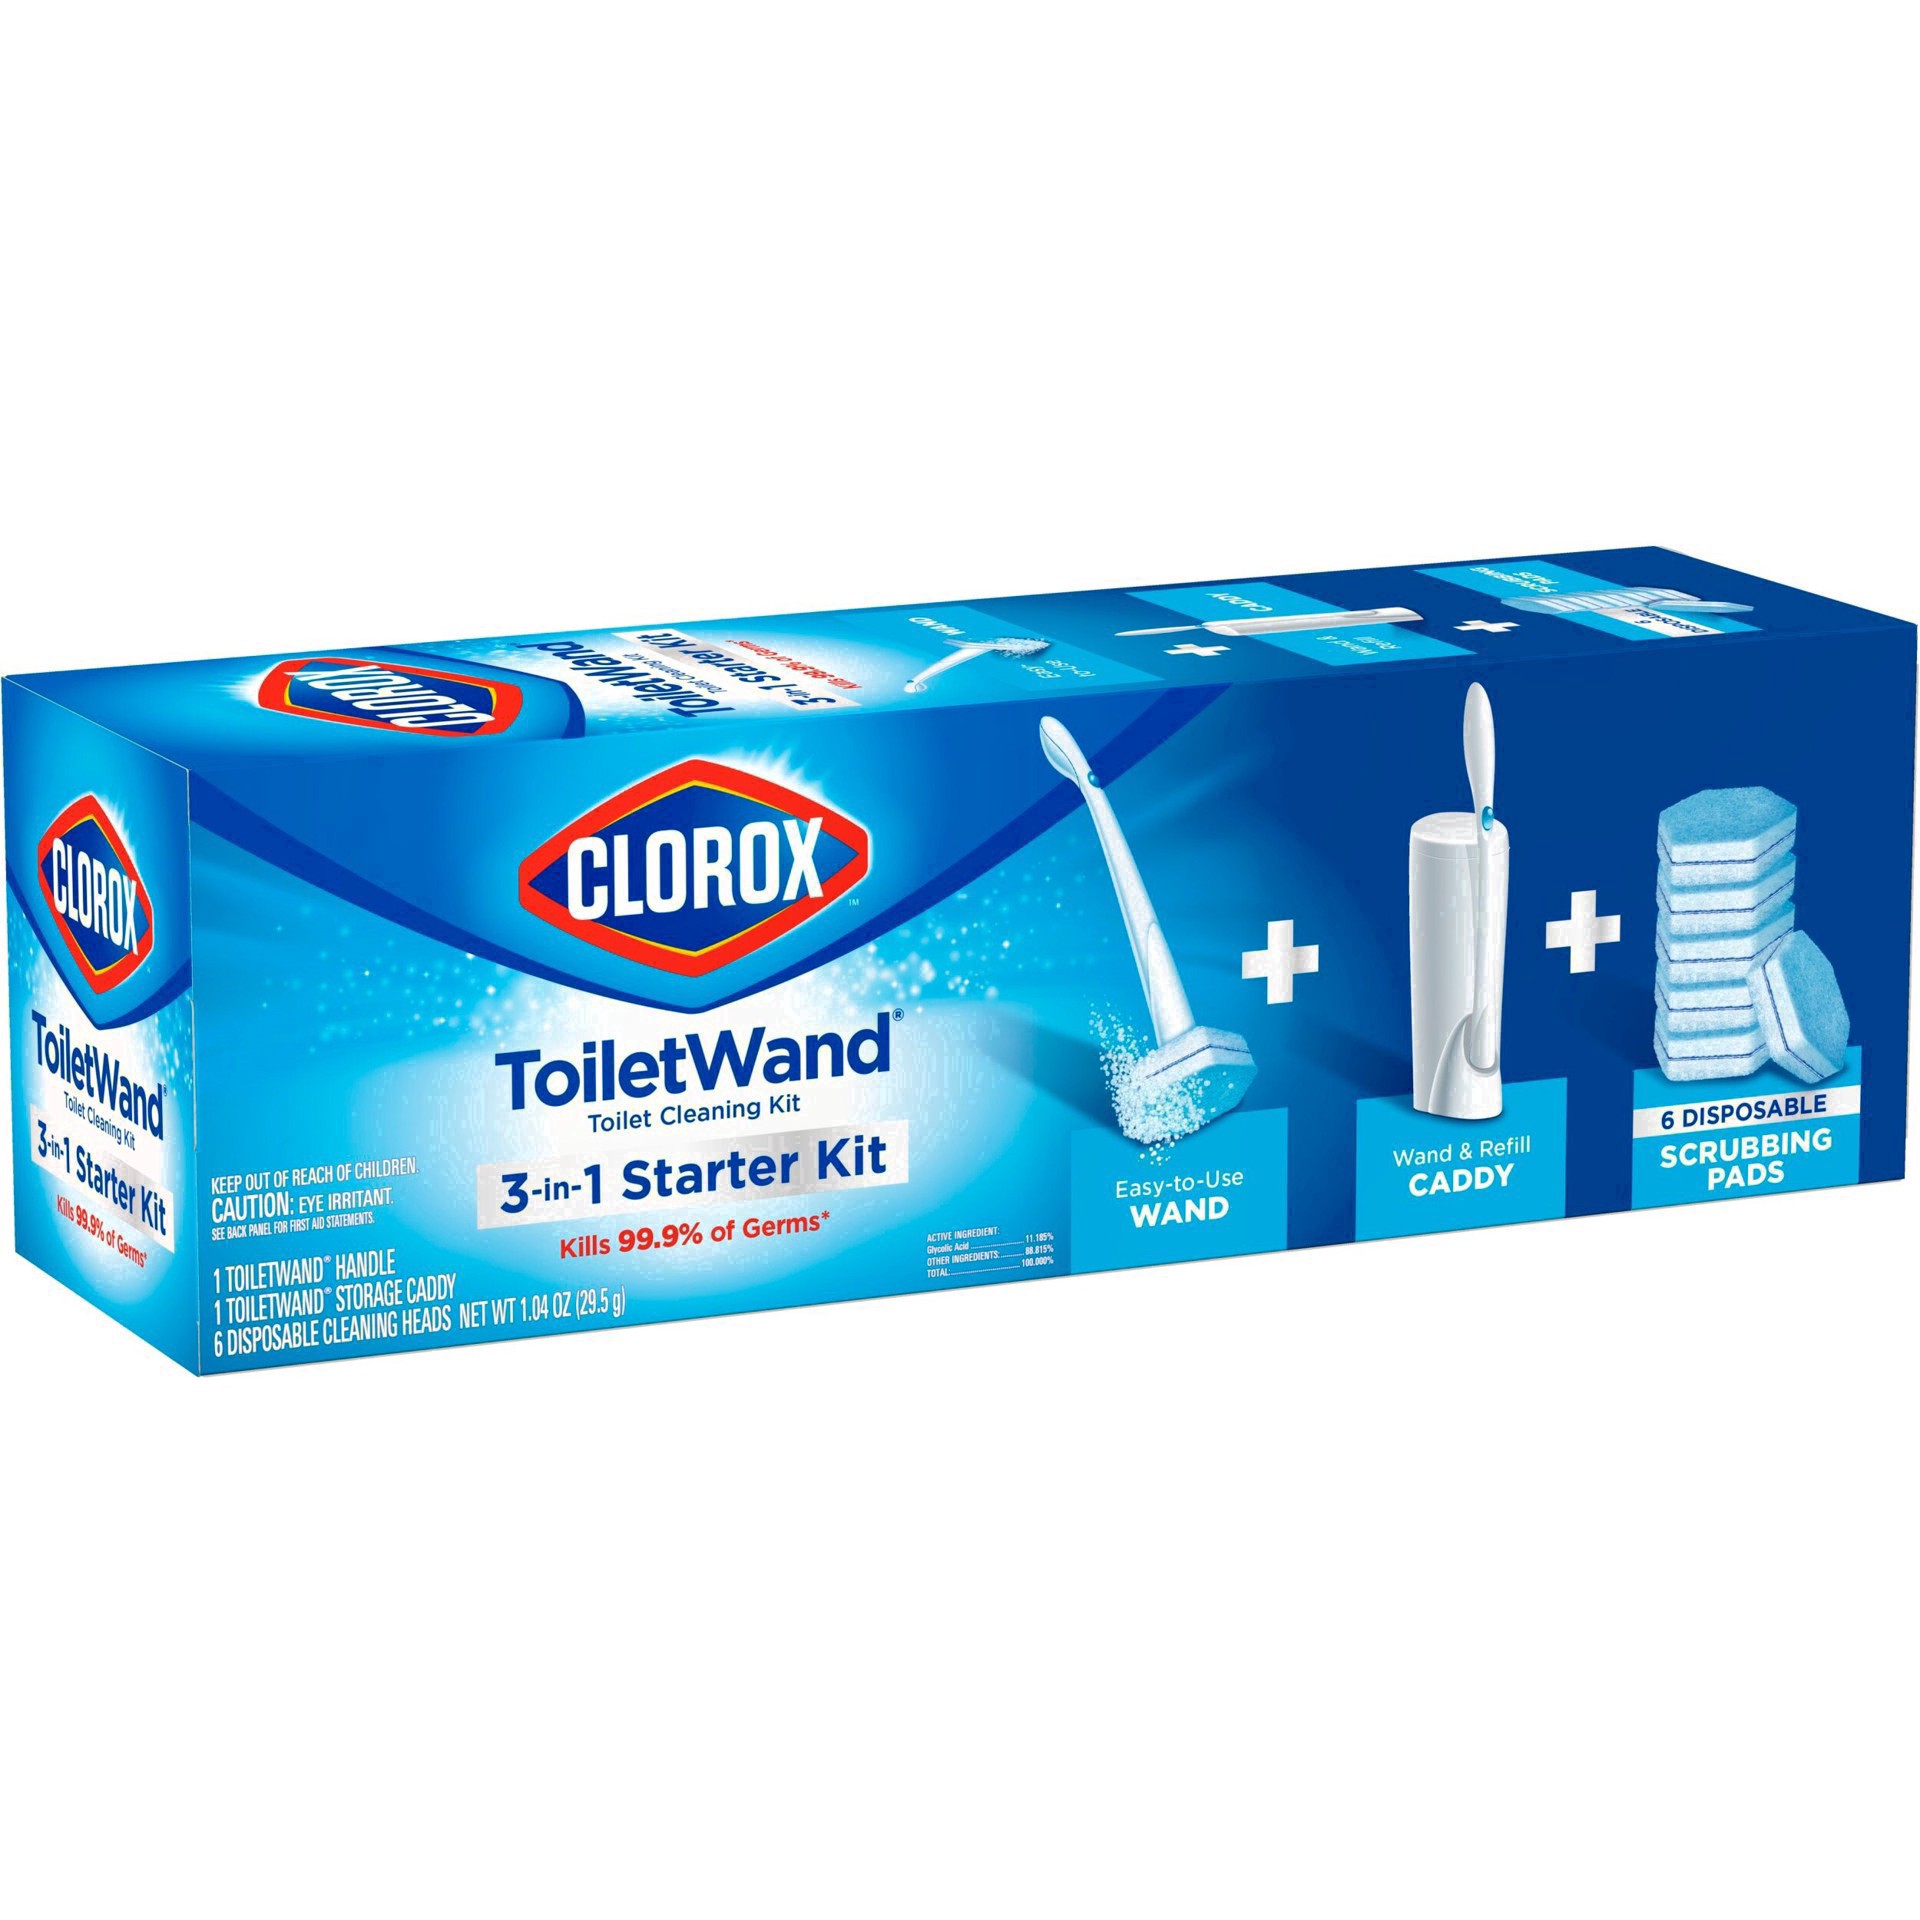 slide 6 of 176, Clorox Toilet Wand 3-in-1 Starter Toliet Cleaning Kit, 1 ct